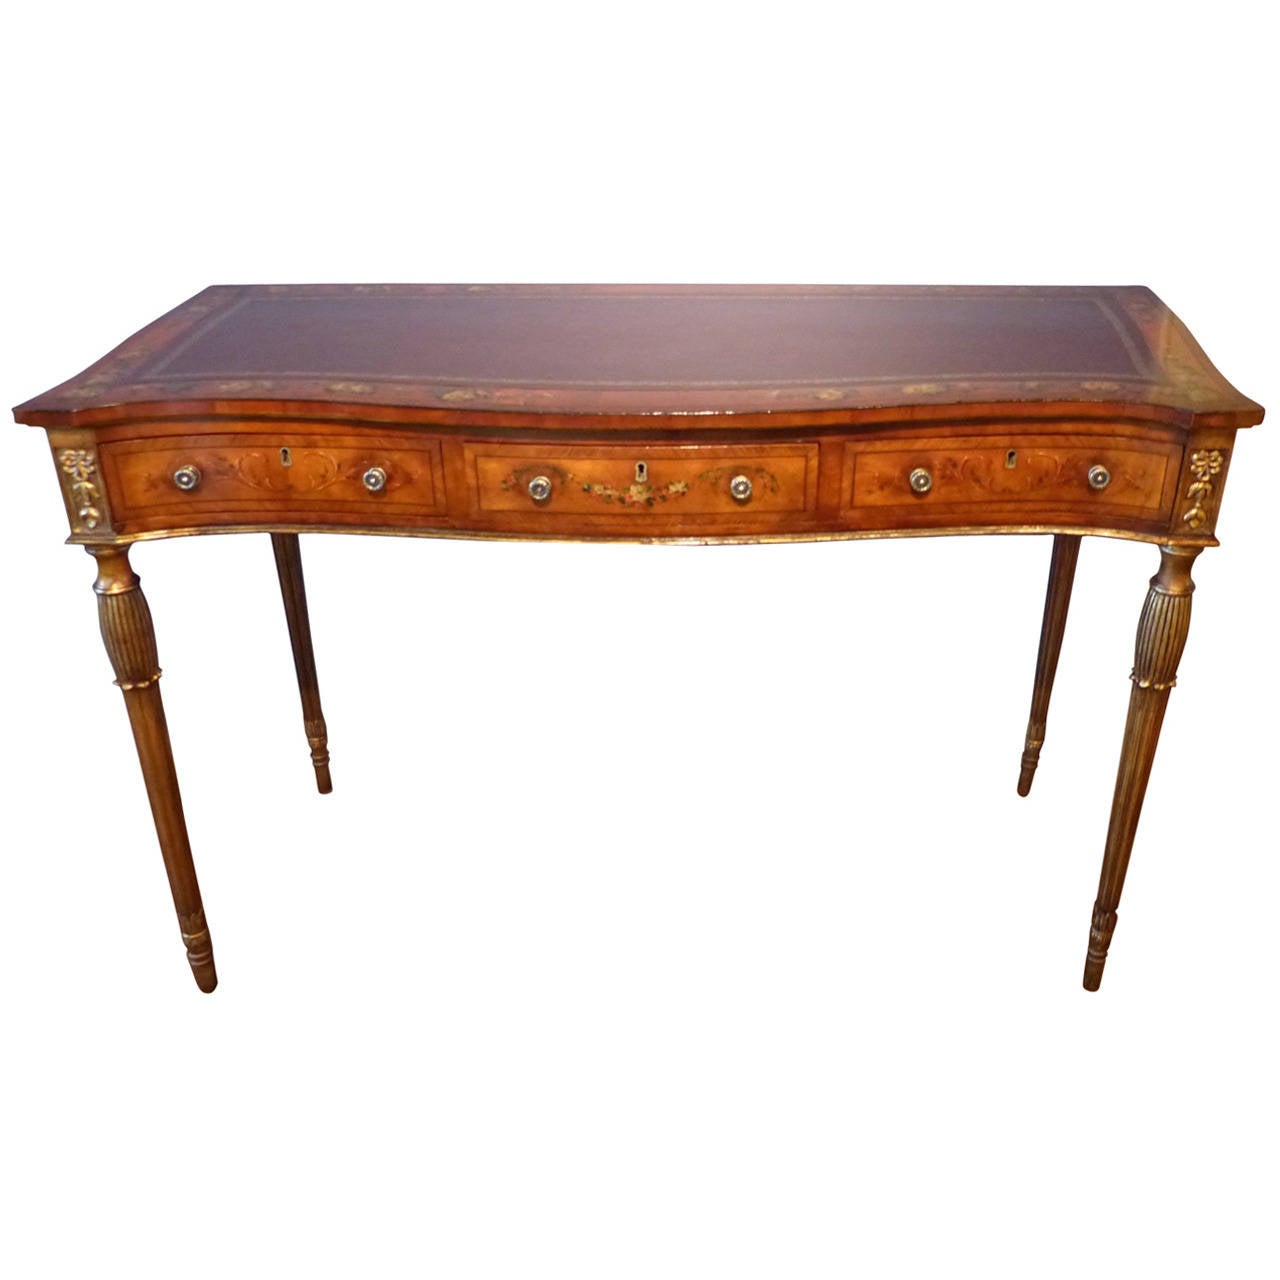 A fine and rare George III satinwood and painted with floral wreaths on gilt and fluted legs surmounted by carved gilt gesso inverted bellflower design. The front of serpentine shape with gilding to the edges of the leather top, circa 1790.